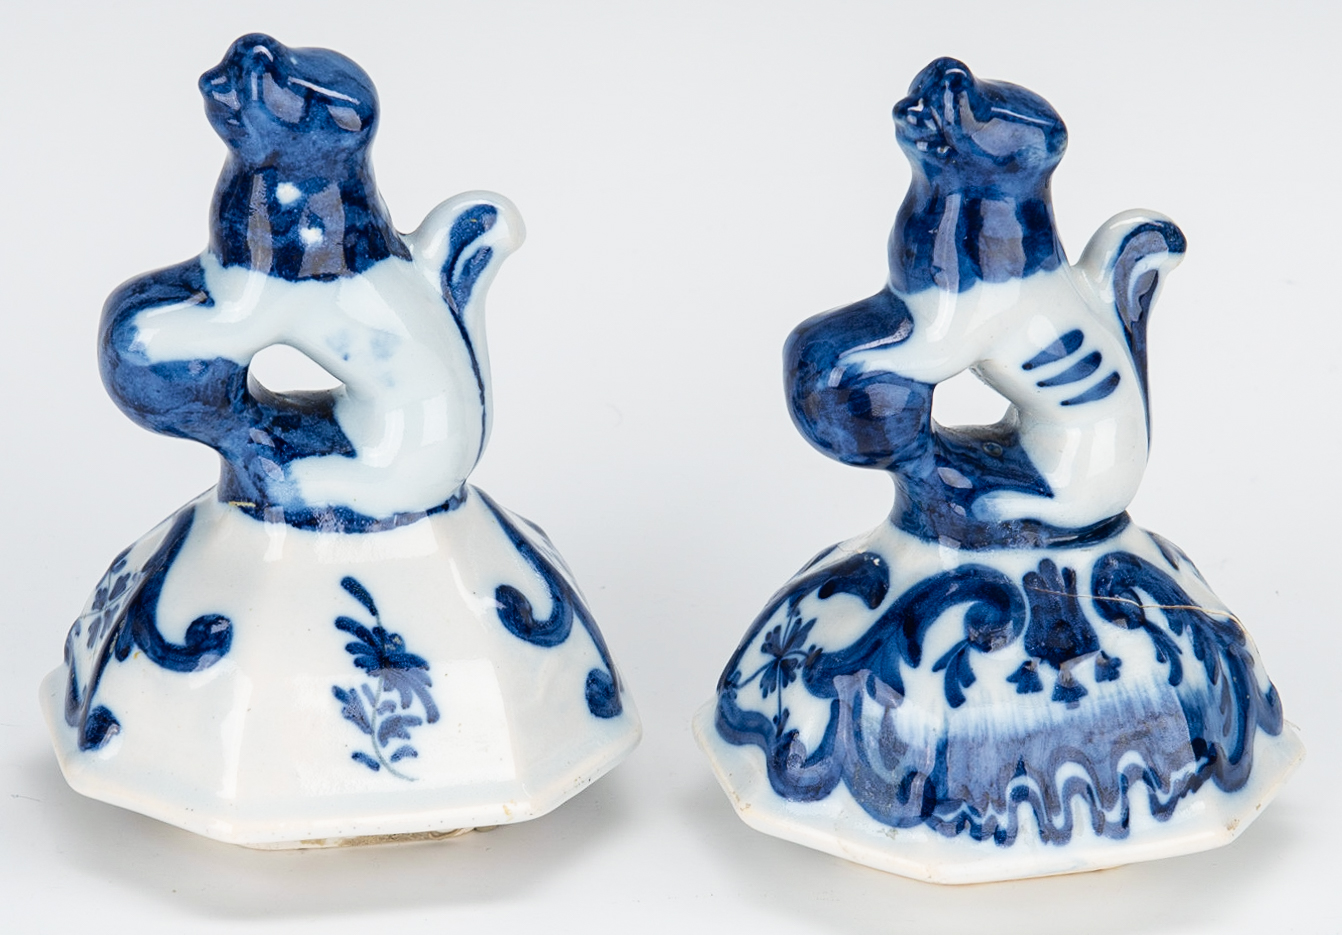 Lot 503: Pair of Signed Delft Lidded Urns